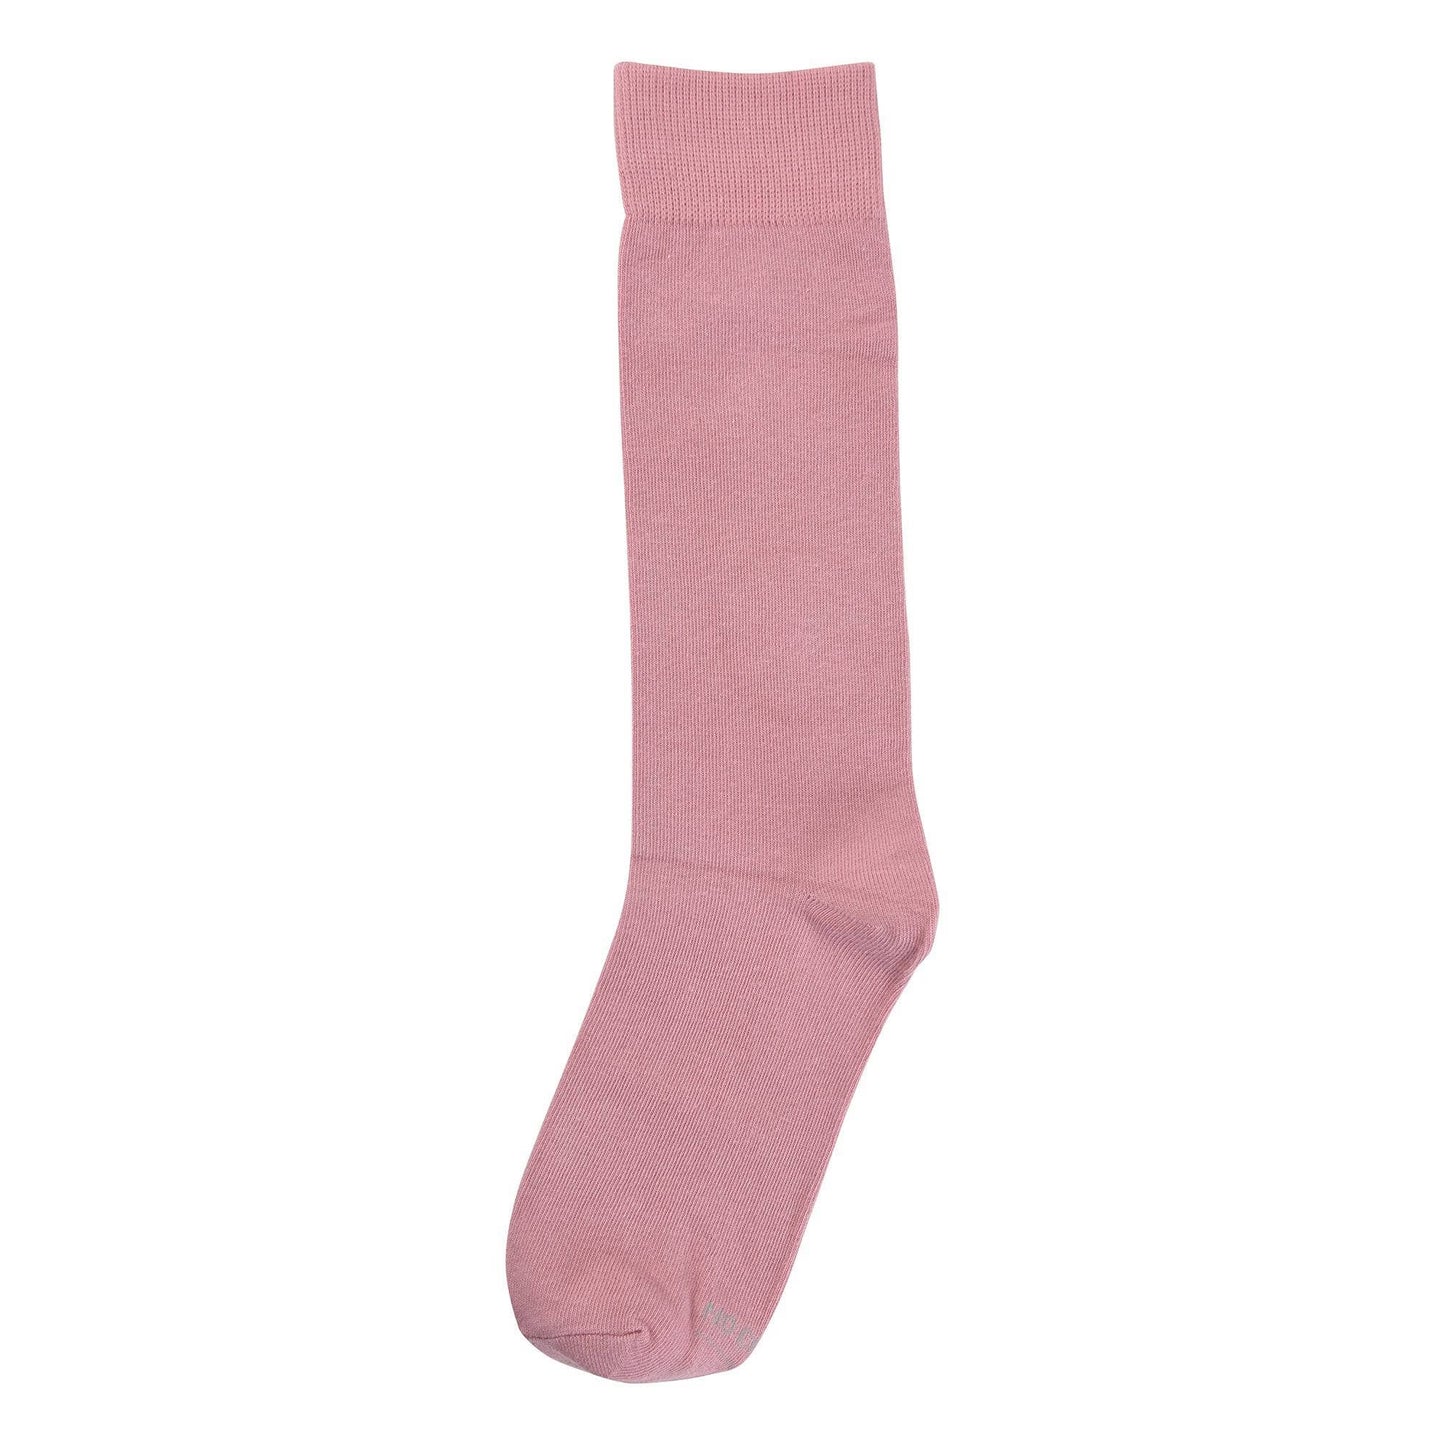 The No Cold Feet - Dusty Rose - Men's Gifts - Manly Bands